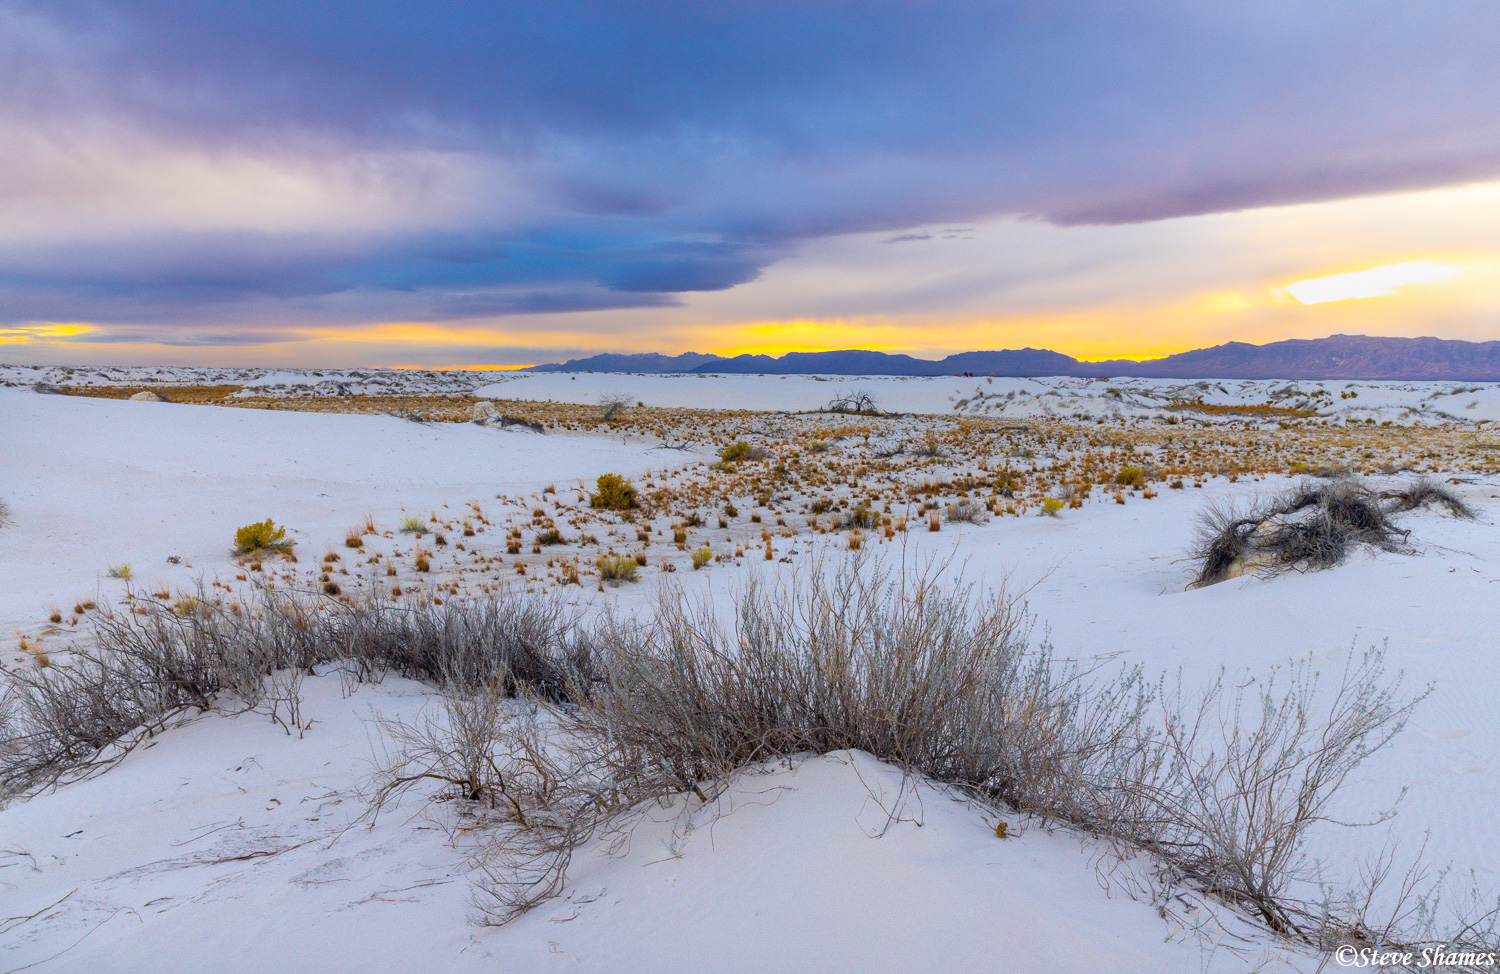 A colorful sky over the landscape of White Sands.